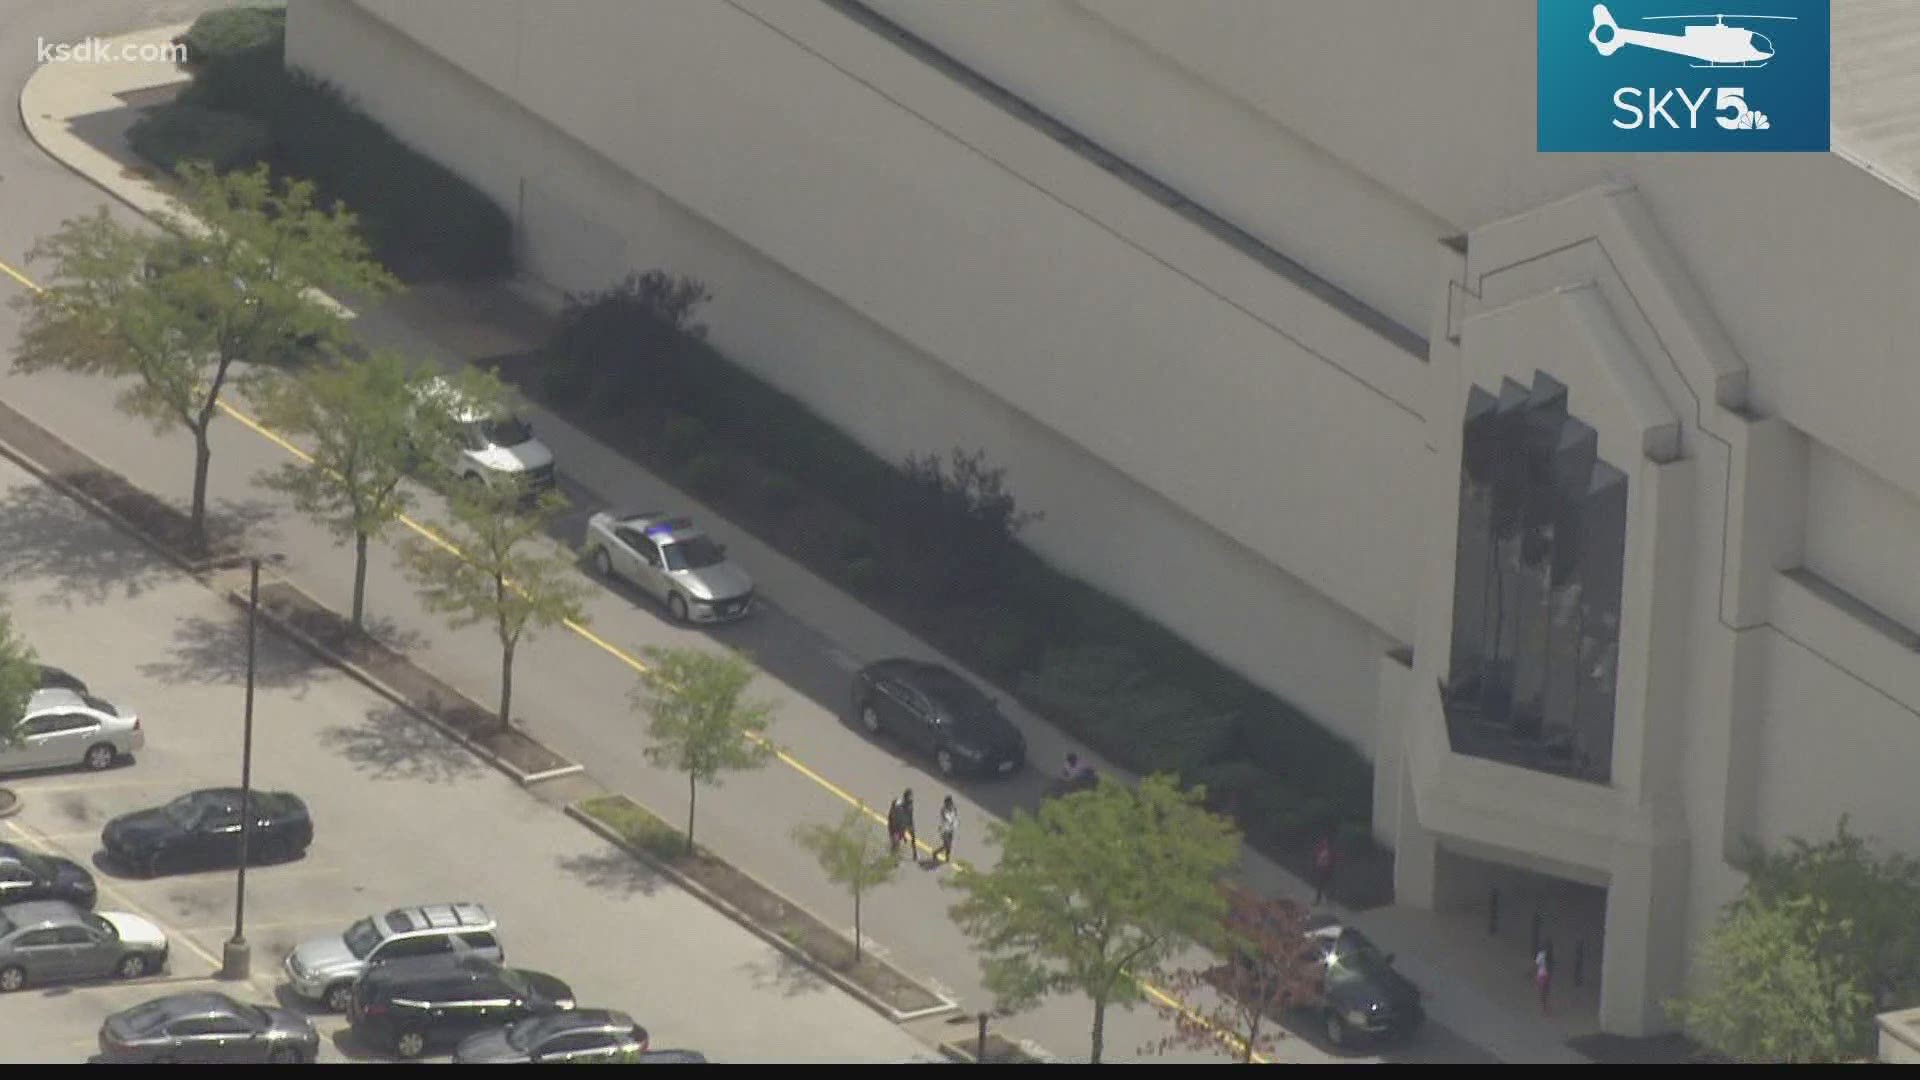 Police held a press conference at the St. Louis  Galleria Mall where two people were shot earlier this afternoon, killing one man